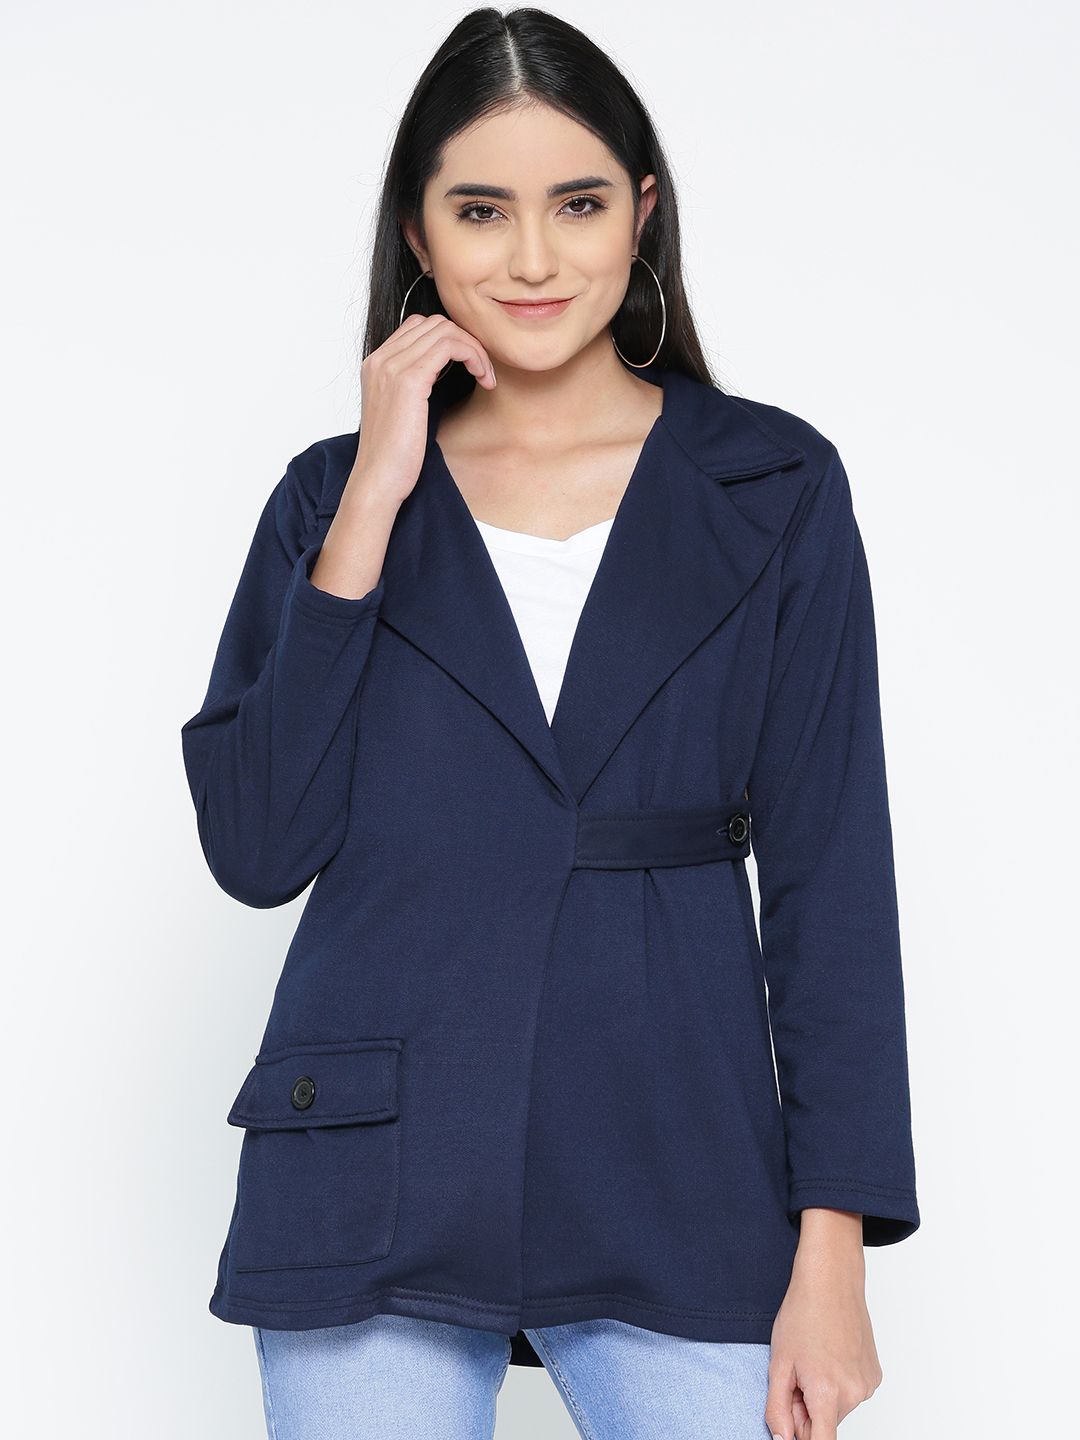 Belle Fille Women Navy Blue Solid Tailored Jacket Price in India